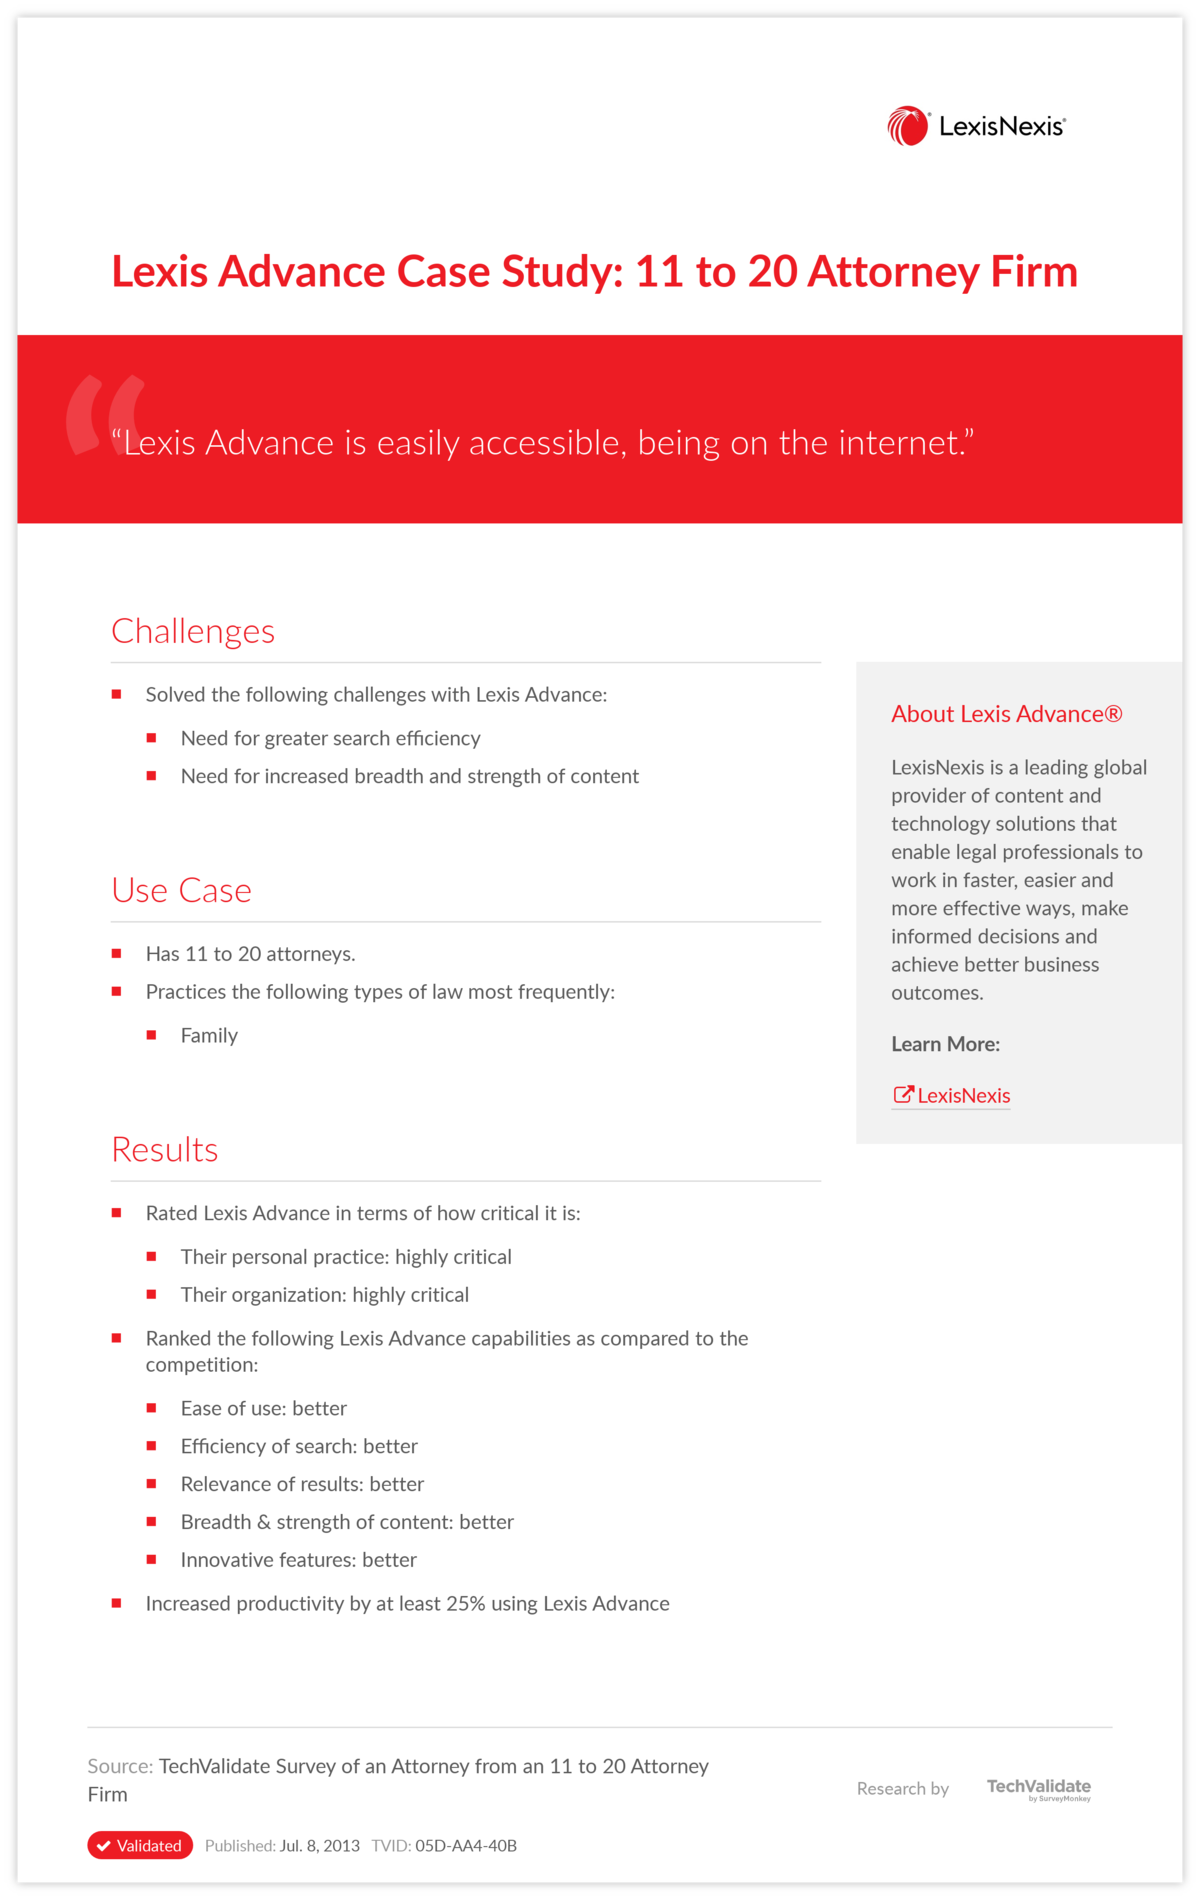 Lexis Advance Case Study: 11 to 20 Attorney Firm